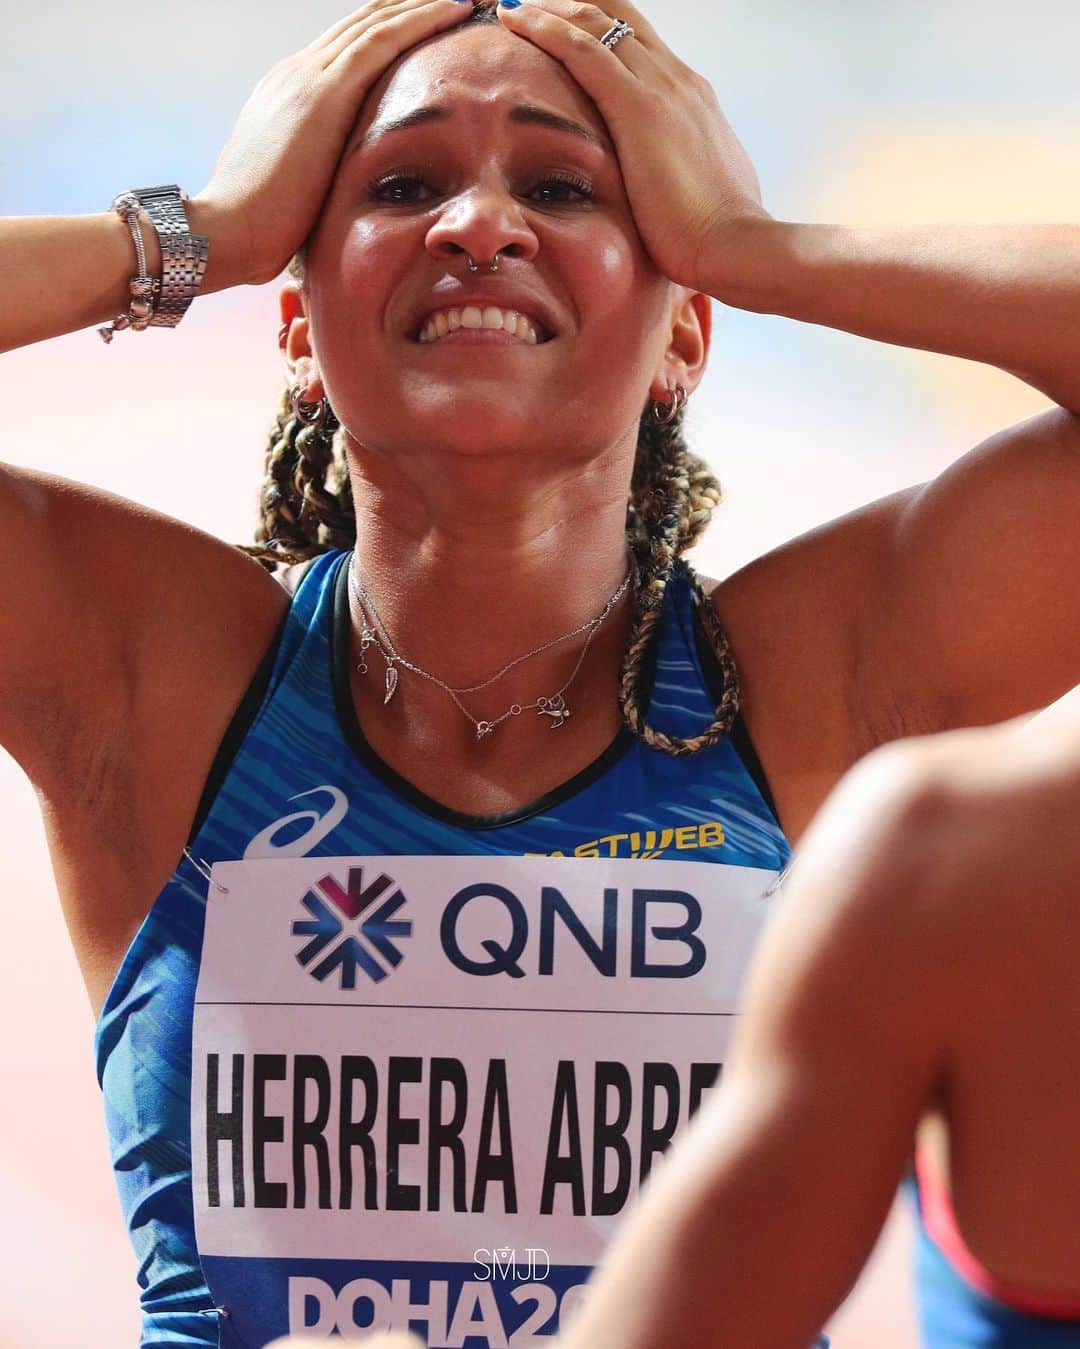 Johanelis HERRERA ABREUのインスタグラム：「Missing so much theses emotions ✨ Thanks @smjdagency for have taken them 📸 • #tb #doha #worldchampionship #wc #19  #qualified #ourroadtotokyo #4x100 #italiangirls #italianrecord #it #sprinters #girls #girlspower #girlsgirlsgirls #herrera #roadtotokyo #lookingforward #morivation #motivationalquotes #happiness #happymoments」